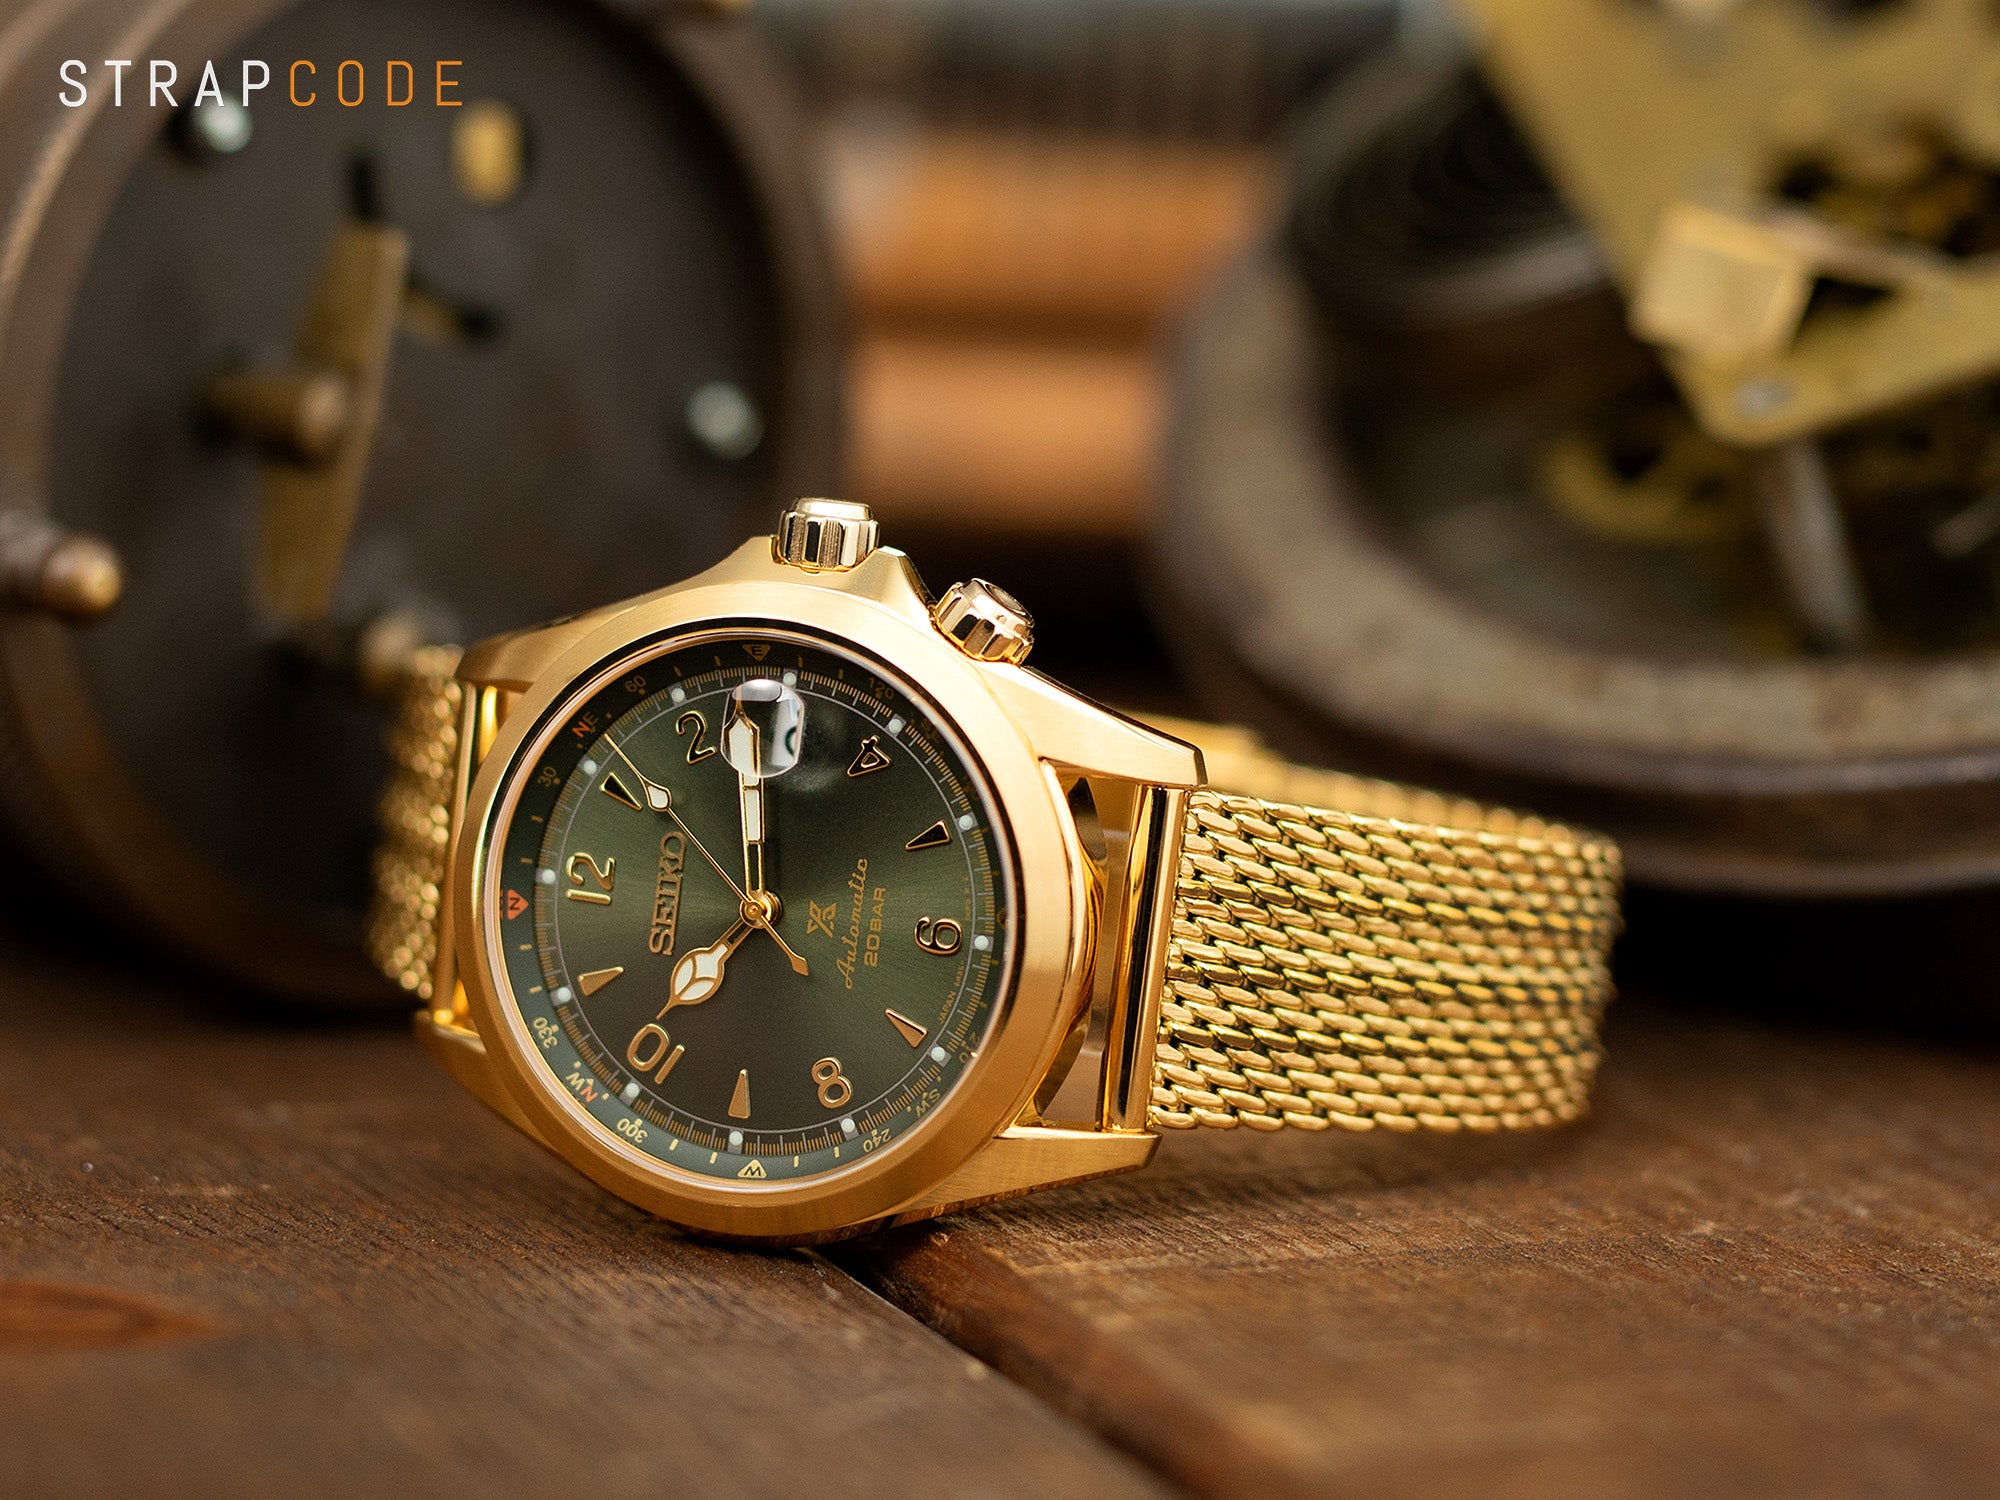 Seiko Prospex Alpinist on a 20mm, polished IP gold Milanese bony wire mesh watch band by Strapcode